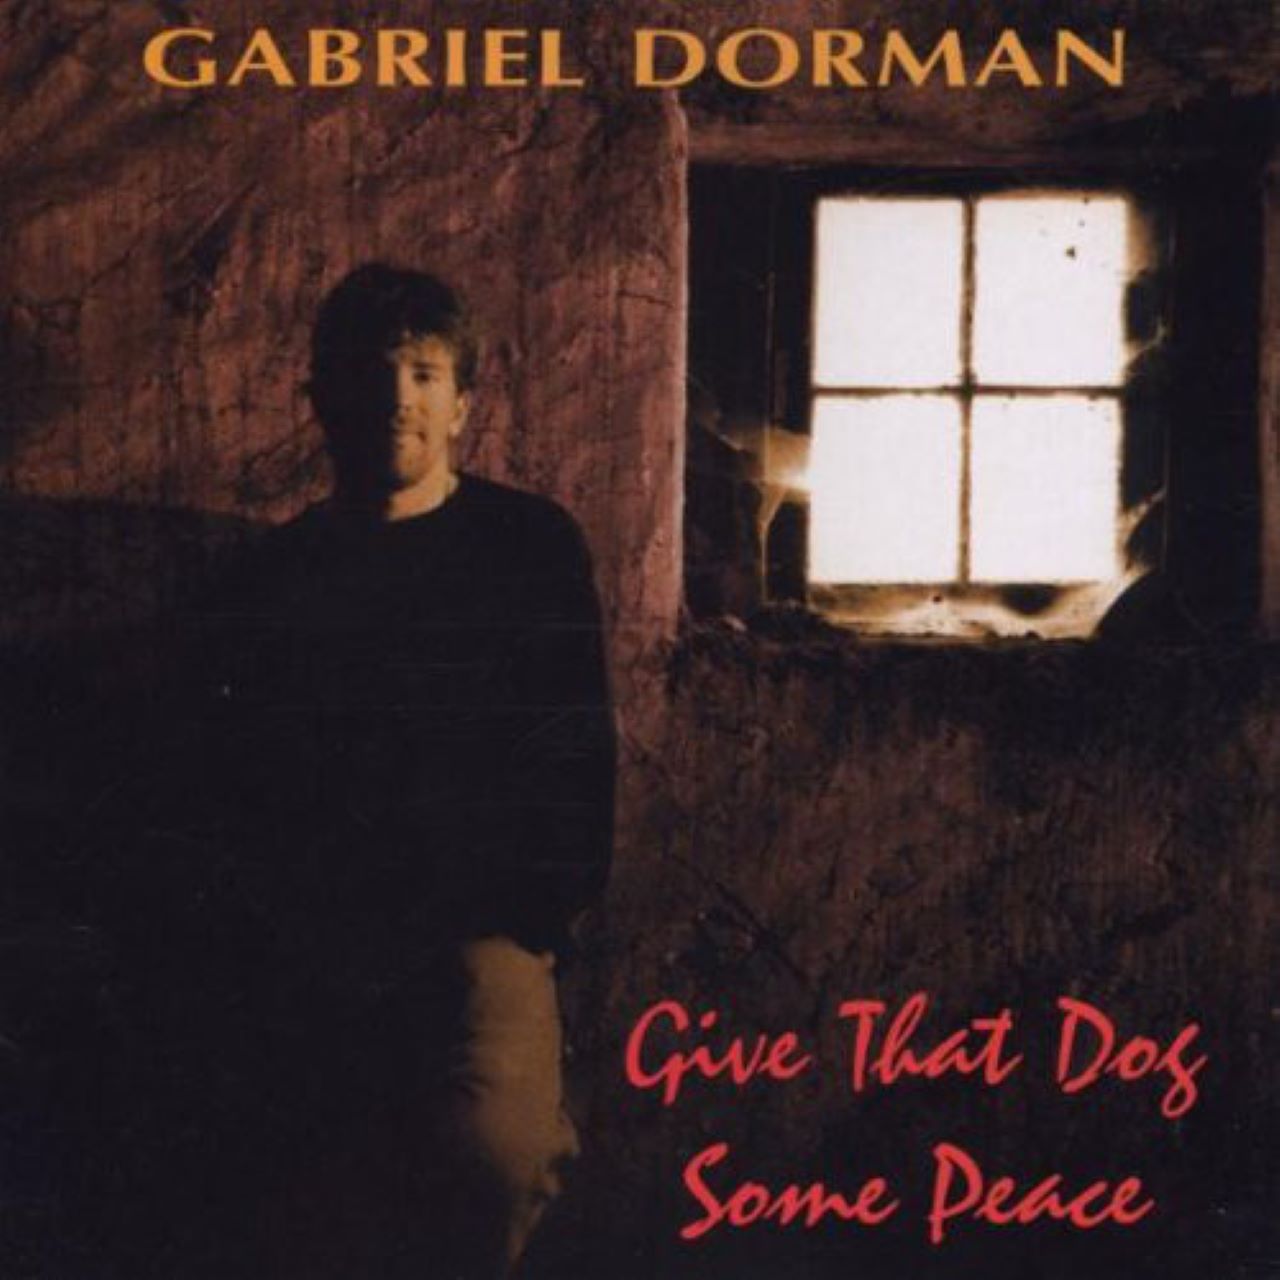 Gabriel Dorman - Give That Dog Some Peace cover album